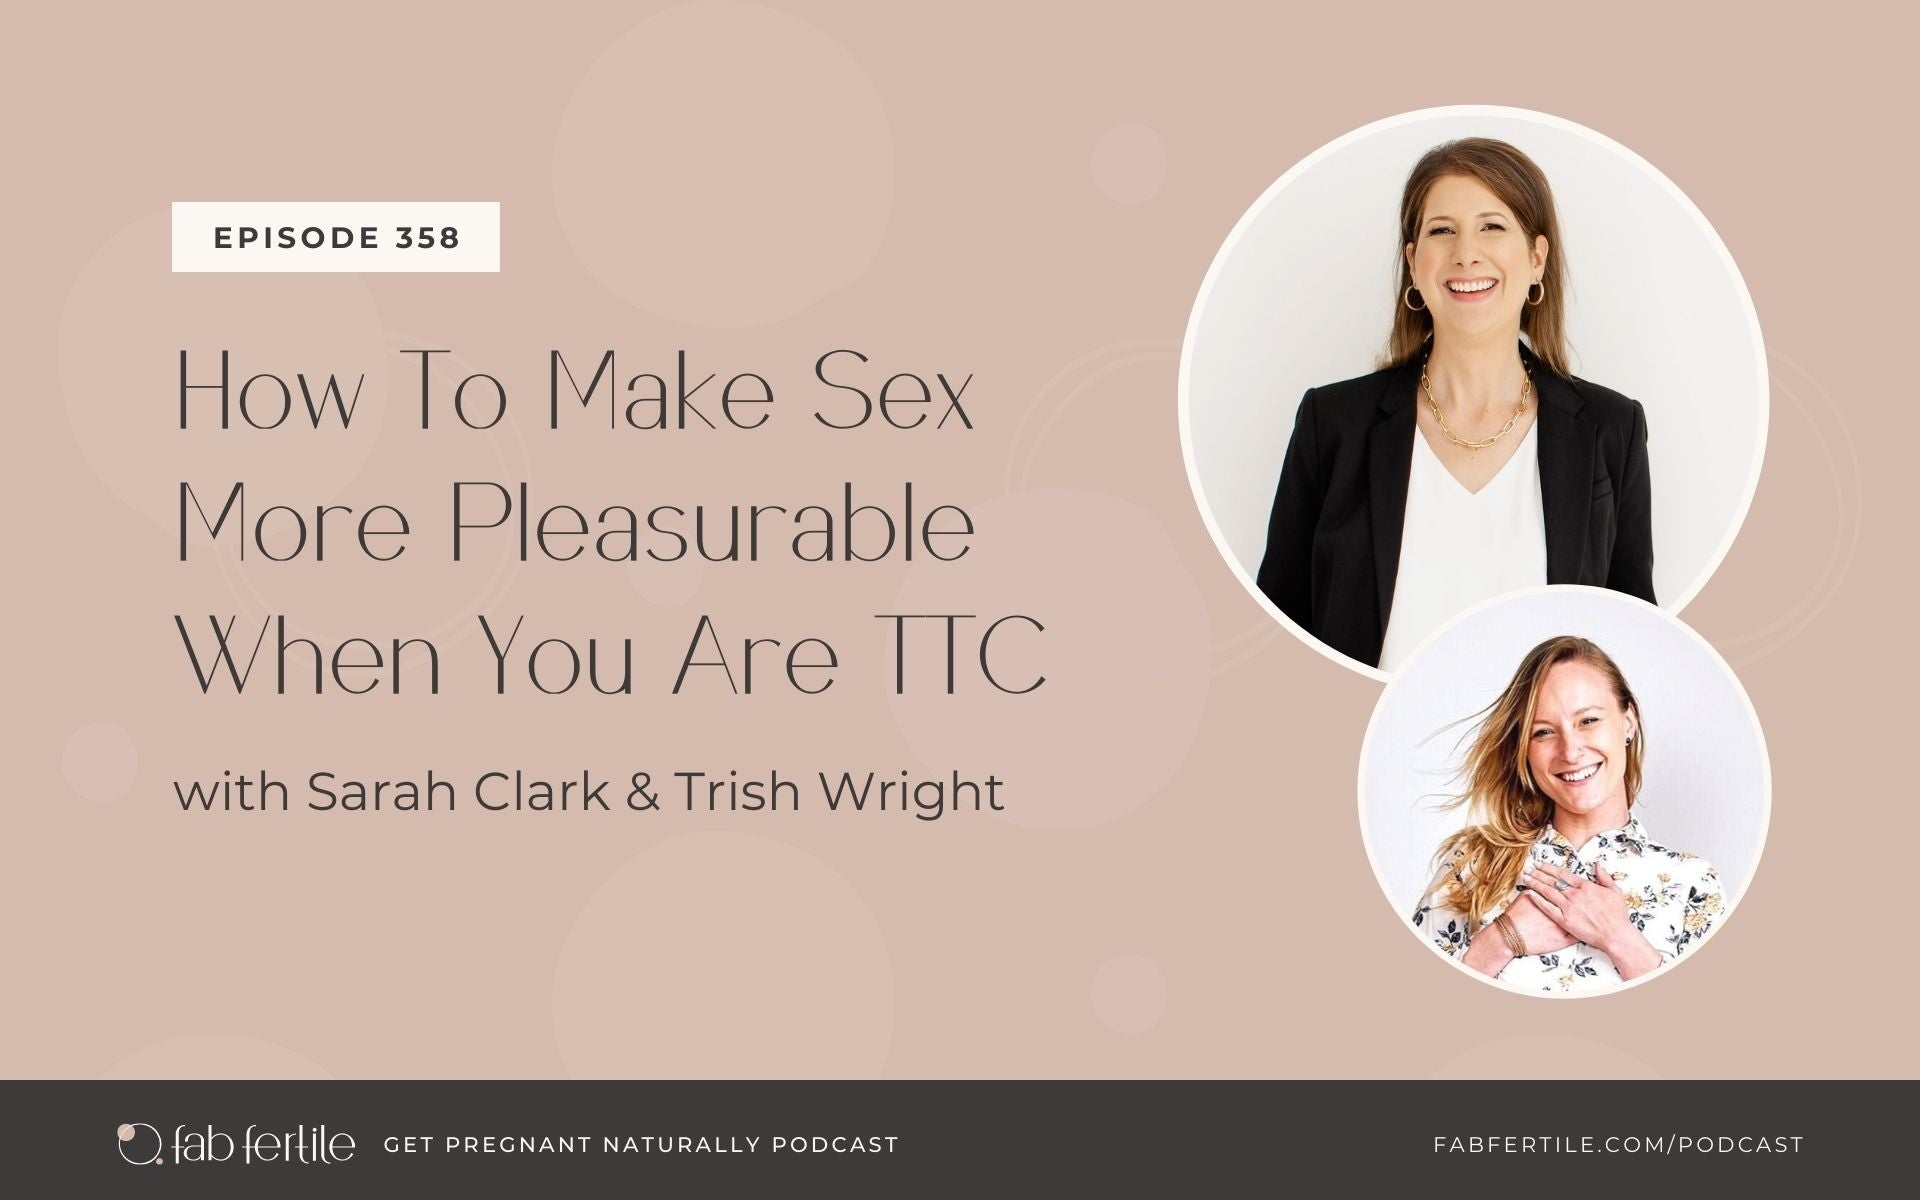 How To Make Sex More Pleasurable When You Are TTC